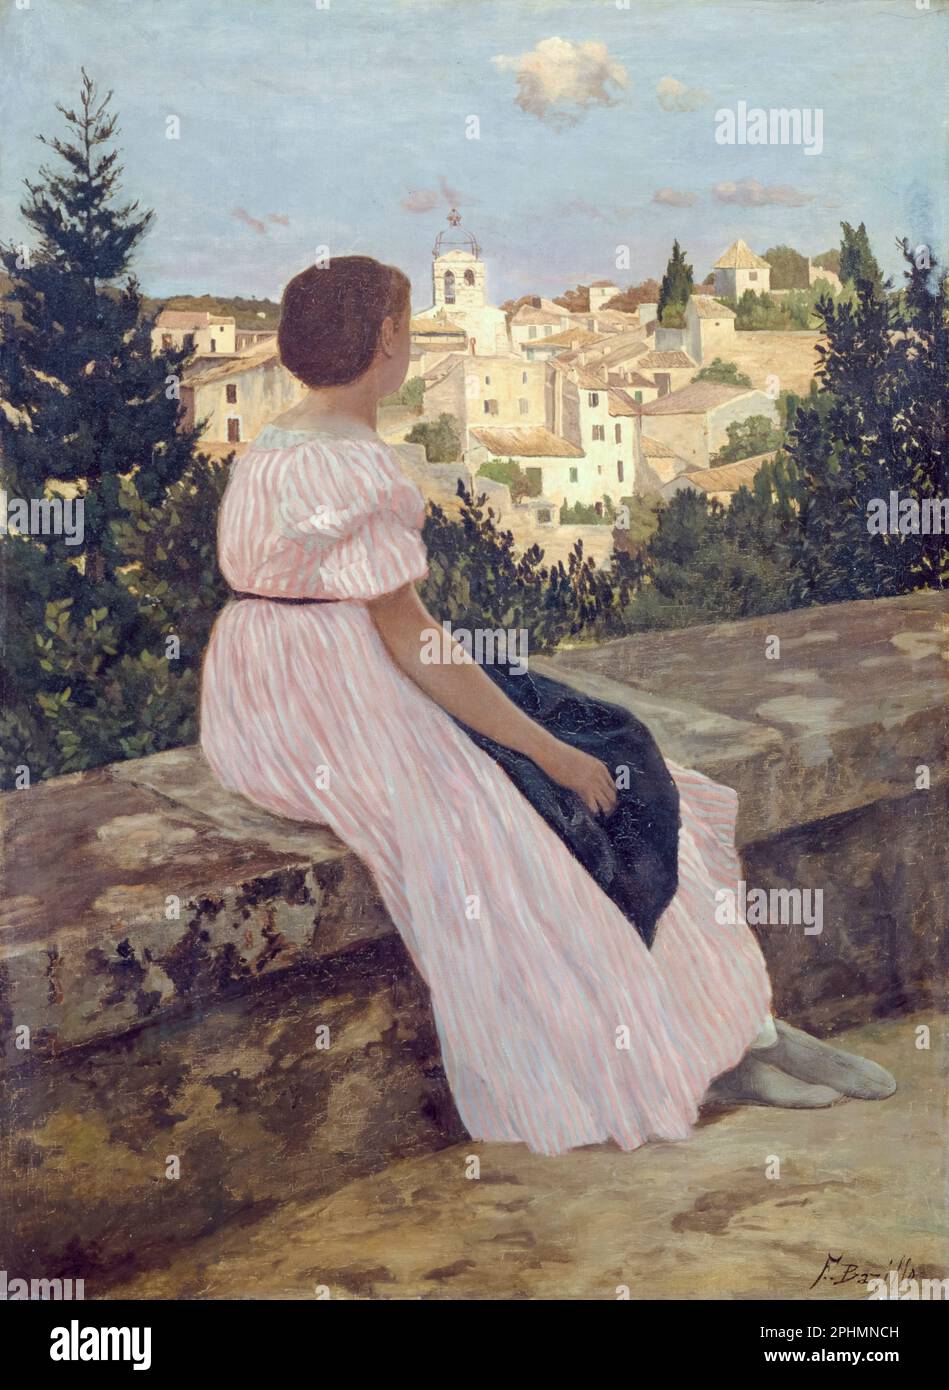 Frédéric Bazille, The Pink Dress, painting in oil on canvas, 1864 Stock Photo